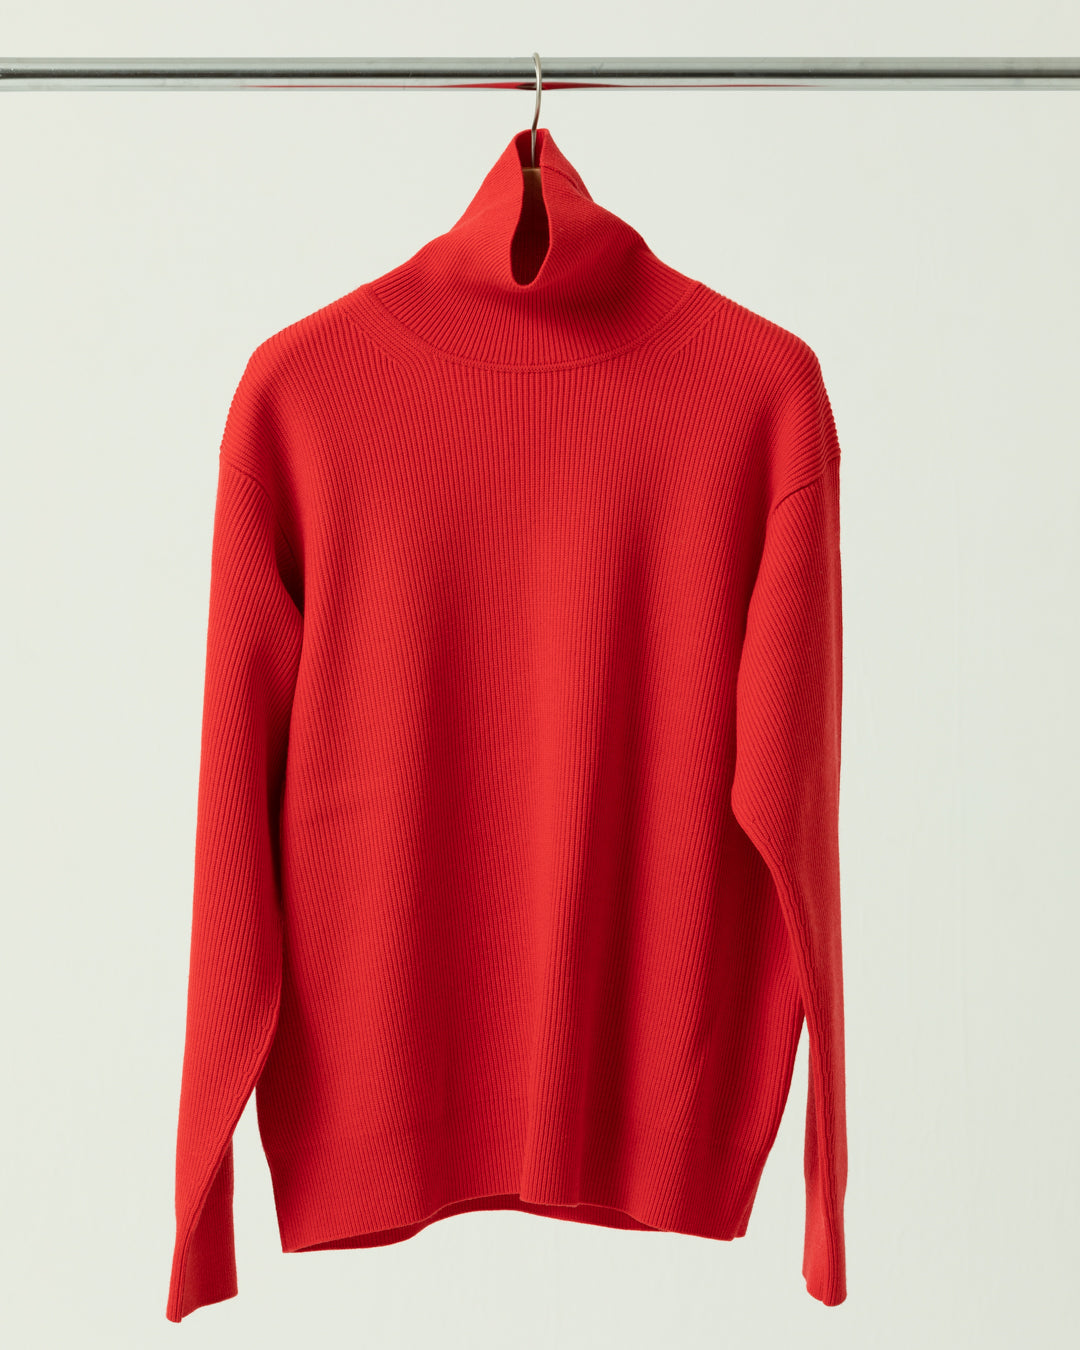 WOOL TECH WIDE TURTLENECK PULL OVER